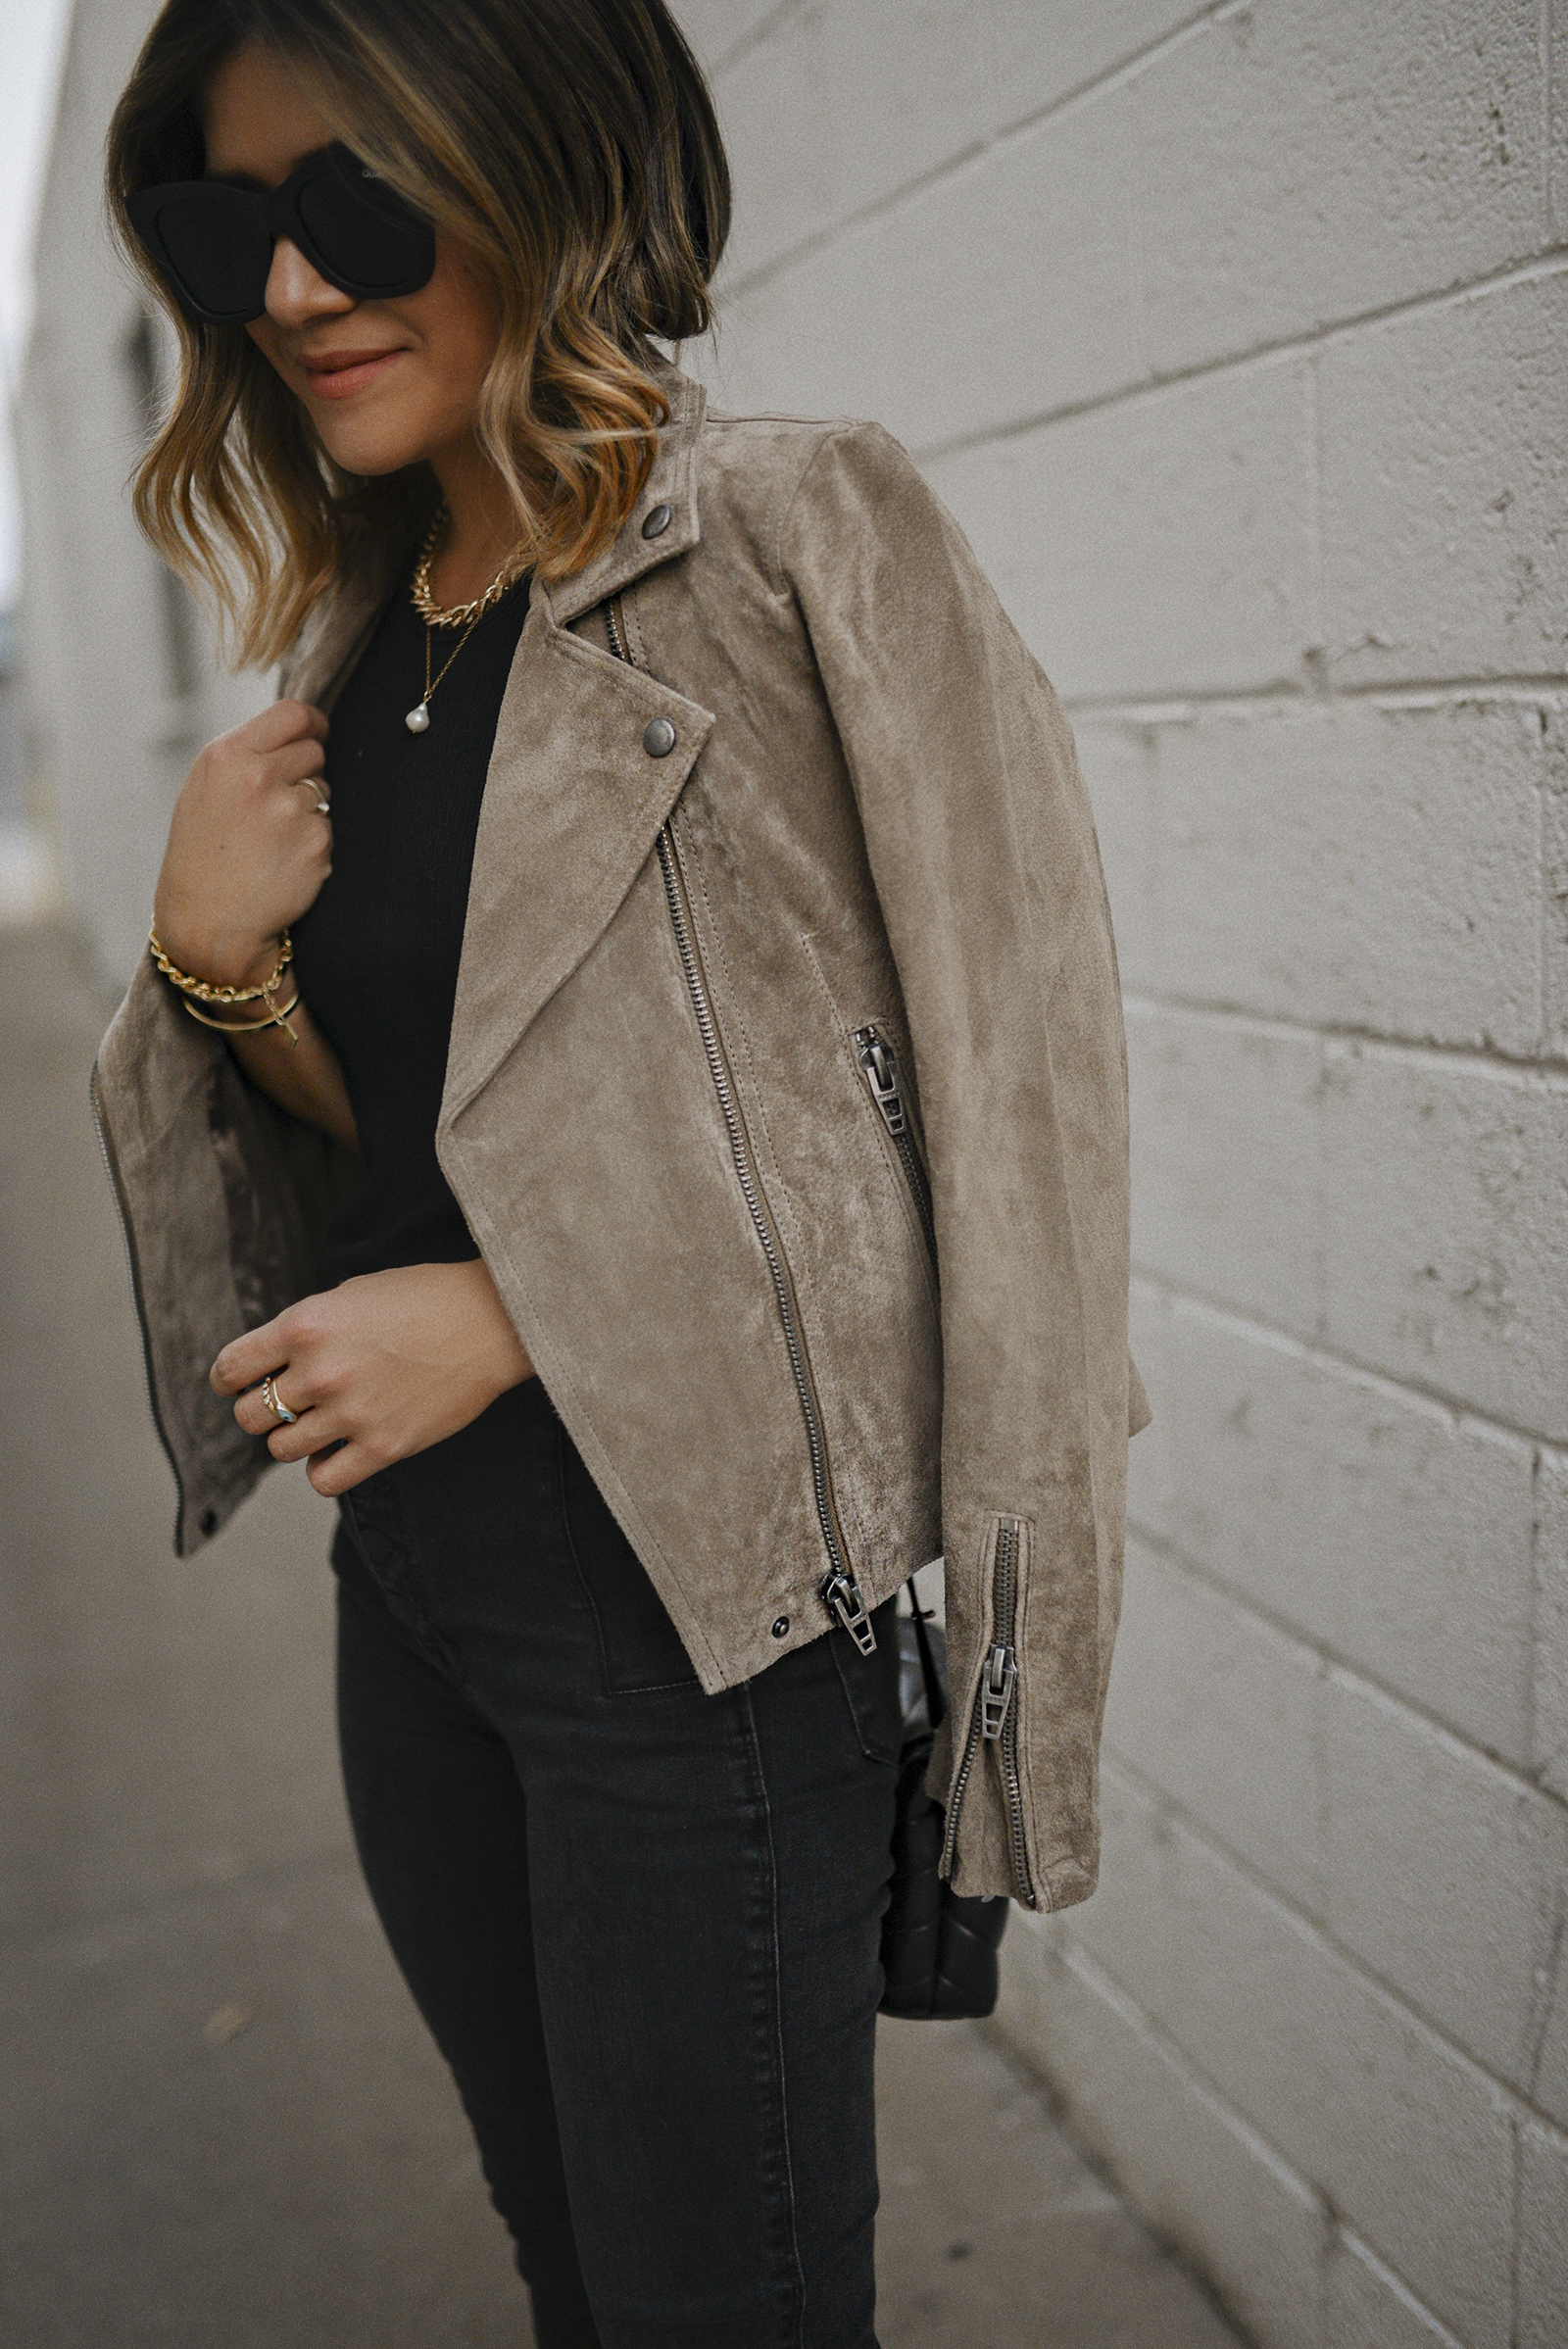 Carolina Hellal of Chic Talk wearing a fall outfit featuring  BLANKNYC jacket, Michael Stars black tank top, JBrand skinny jeans and QUAY sunglasses. 